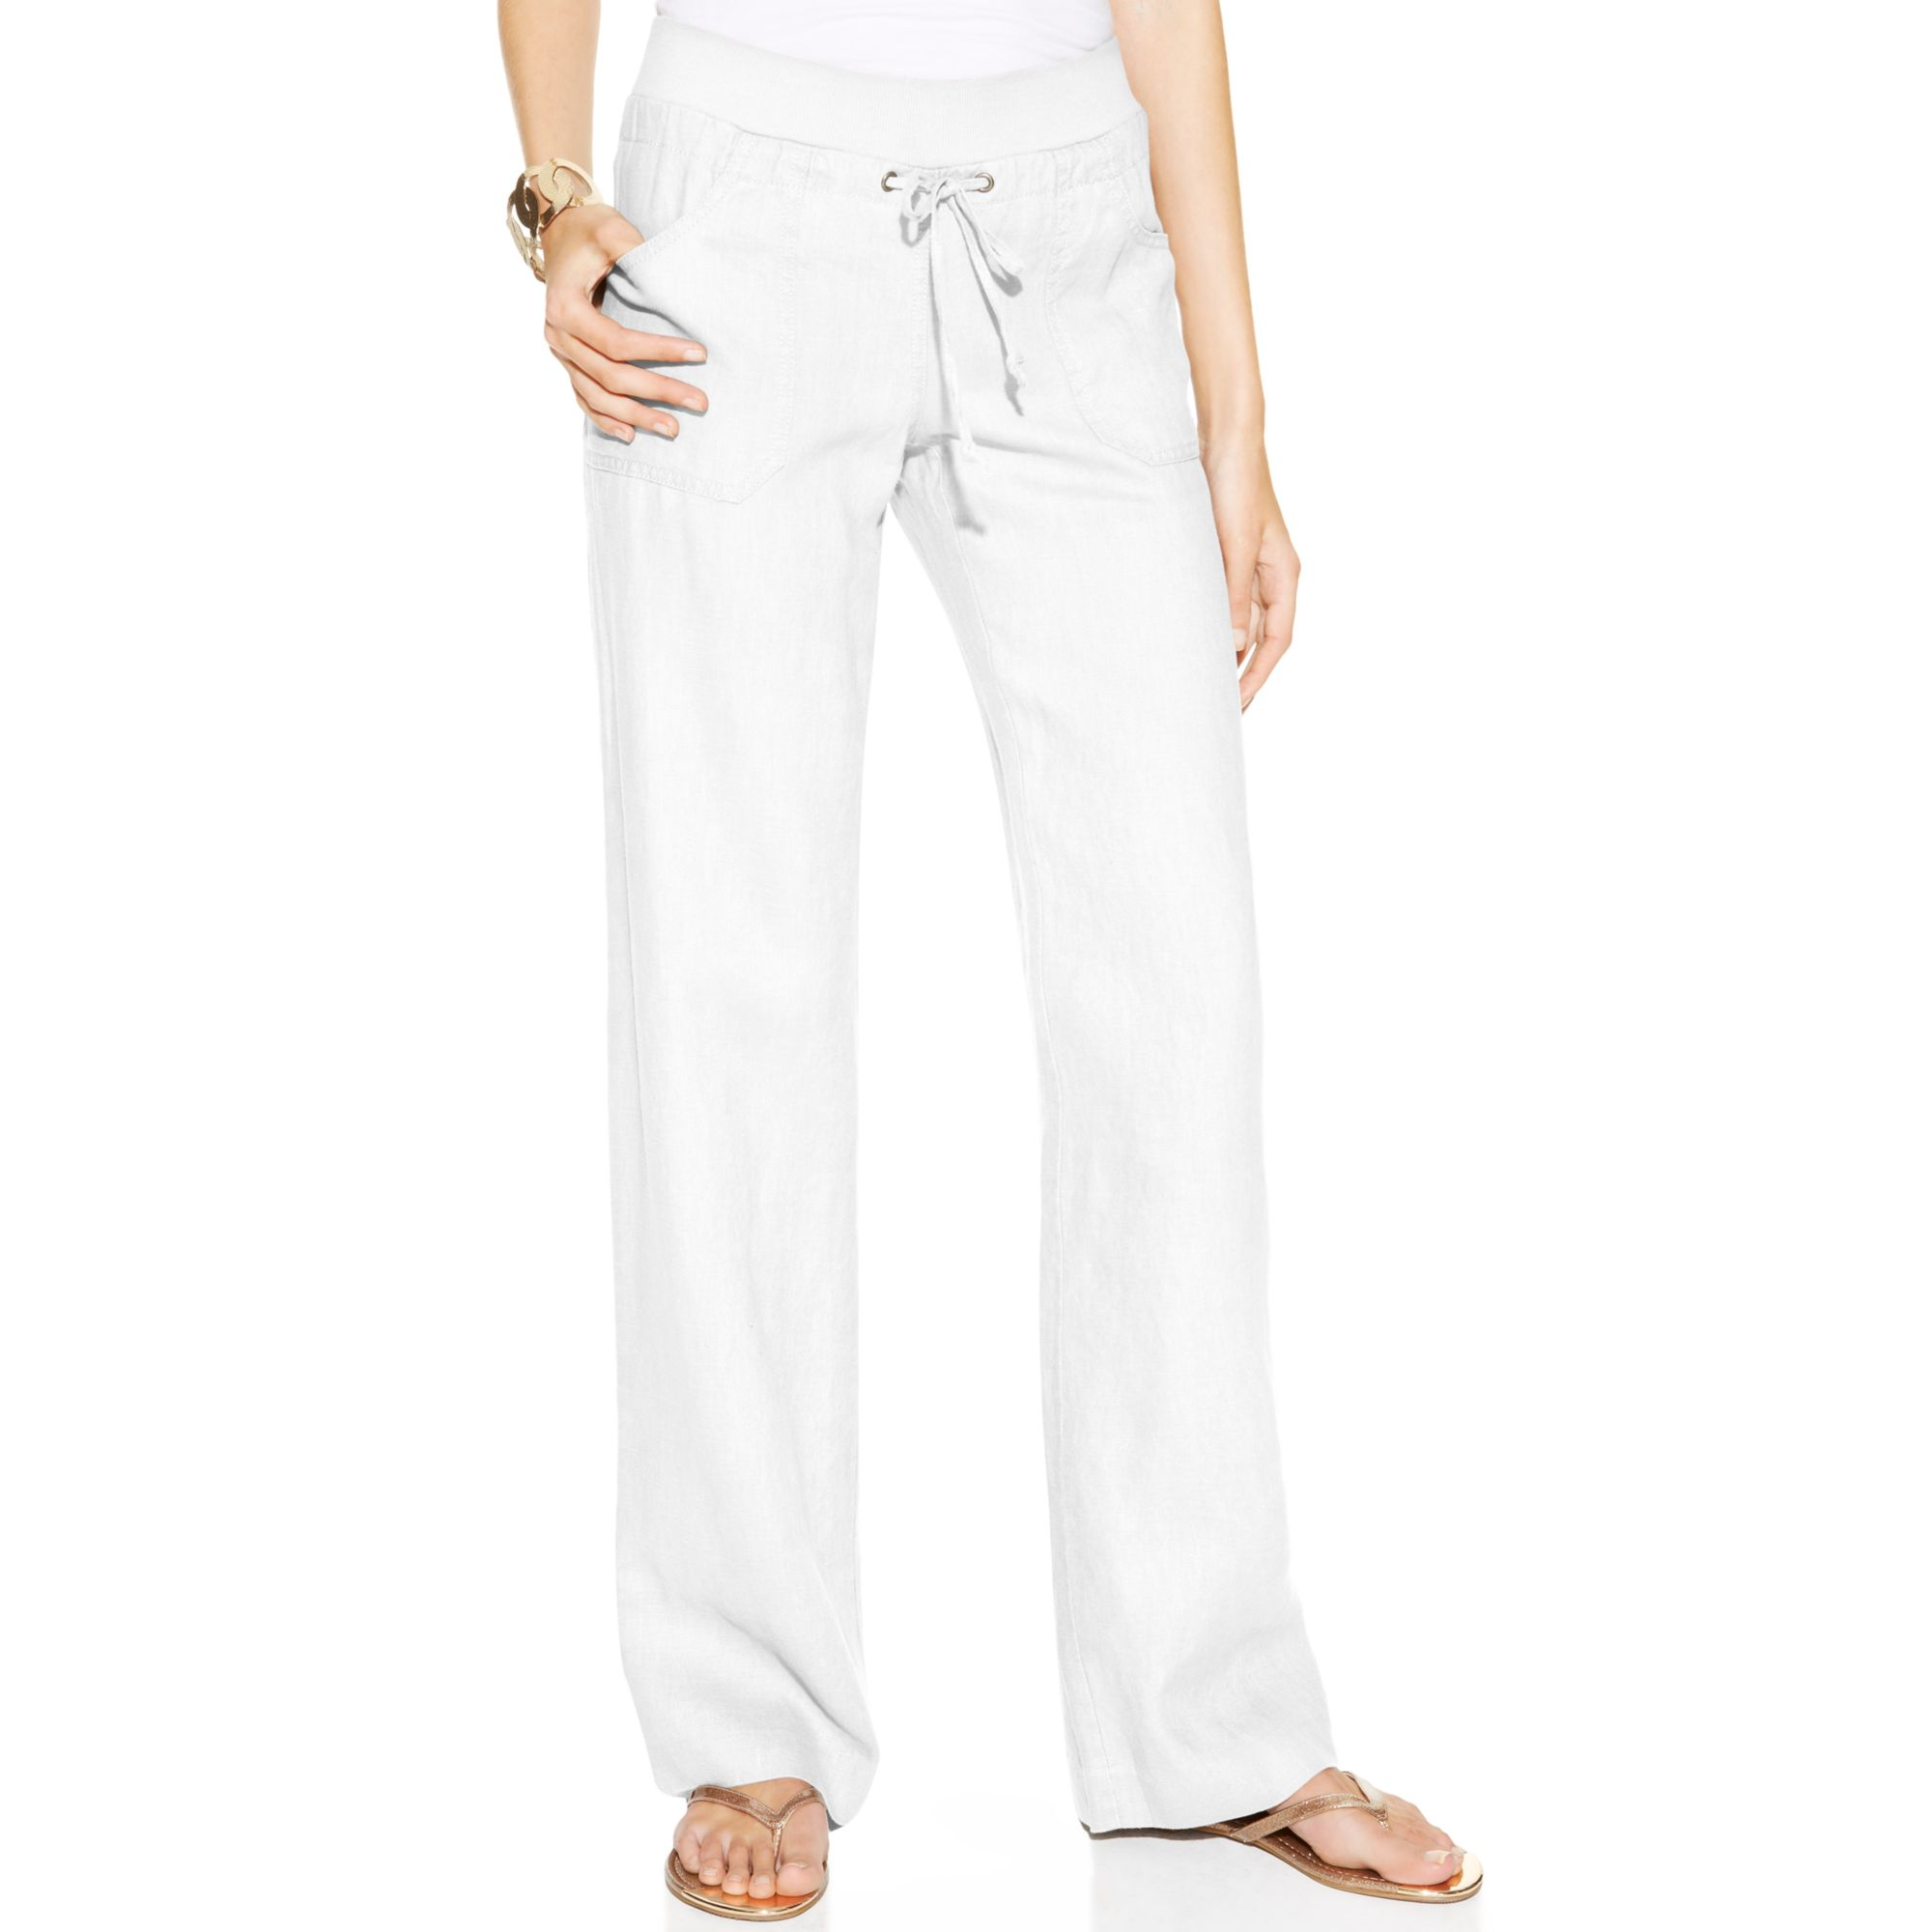 Lyst - Inc International Concepts Wideleg Linen Lounge Pants in White